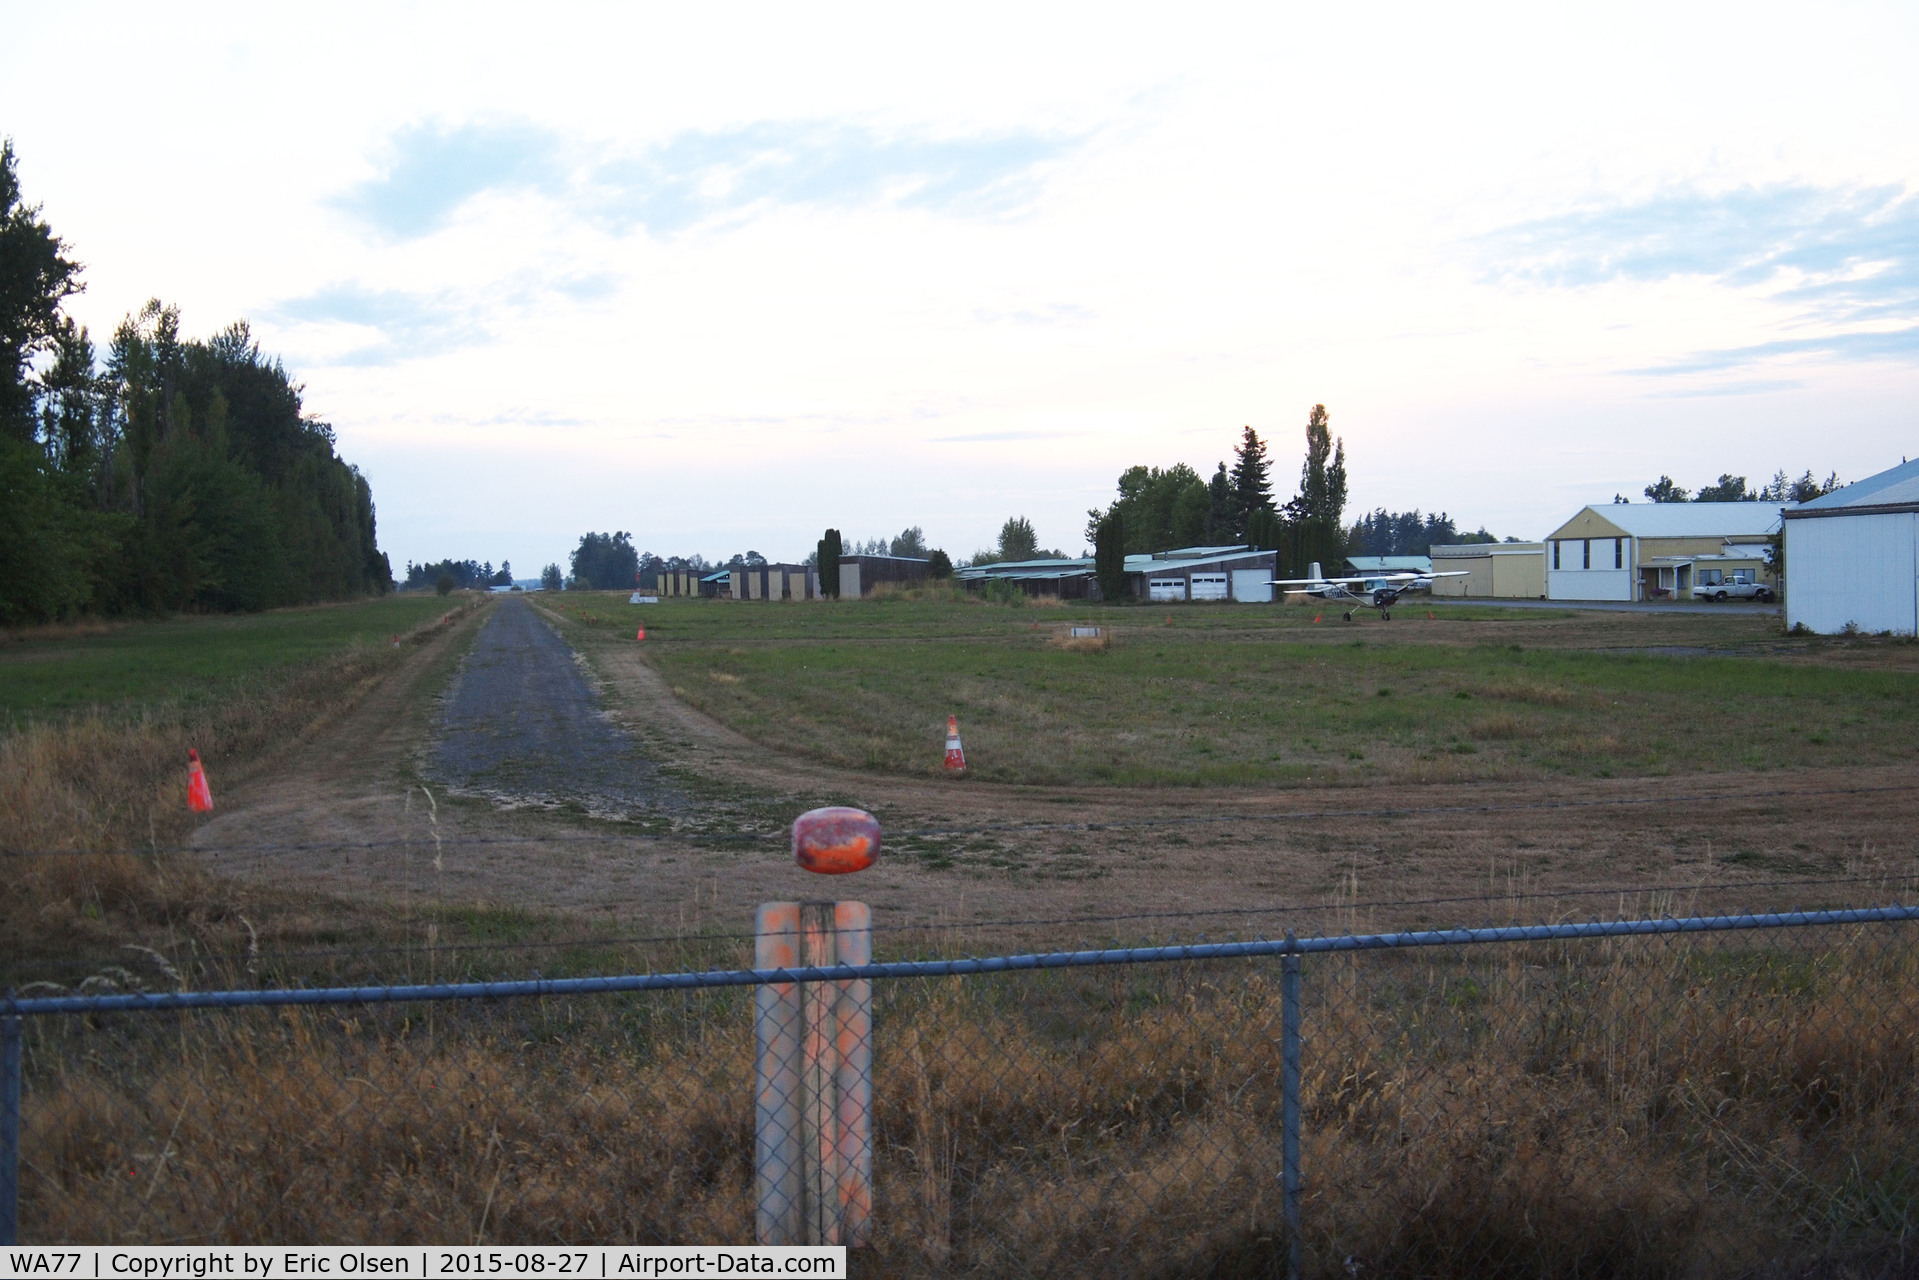 Enumclaw Airport (WA77) - Dusk over the Enumclaw airport.